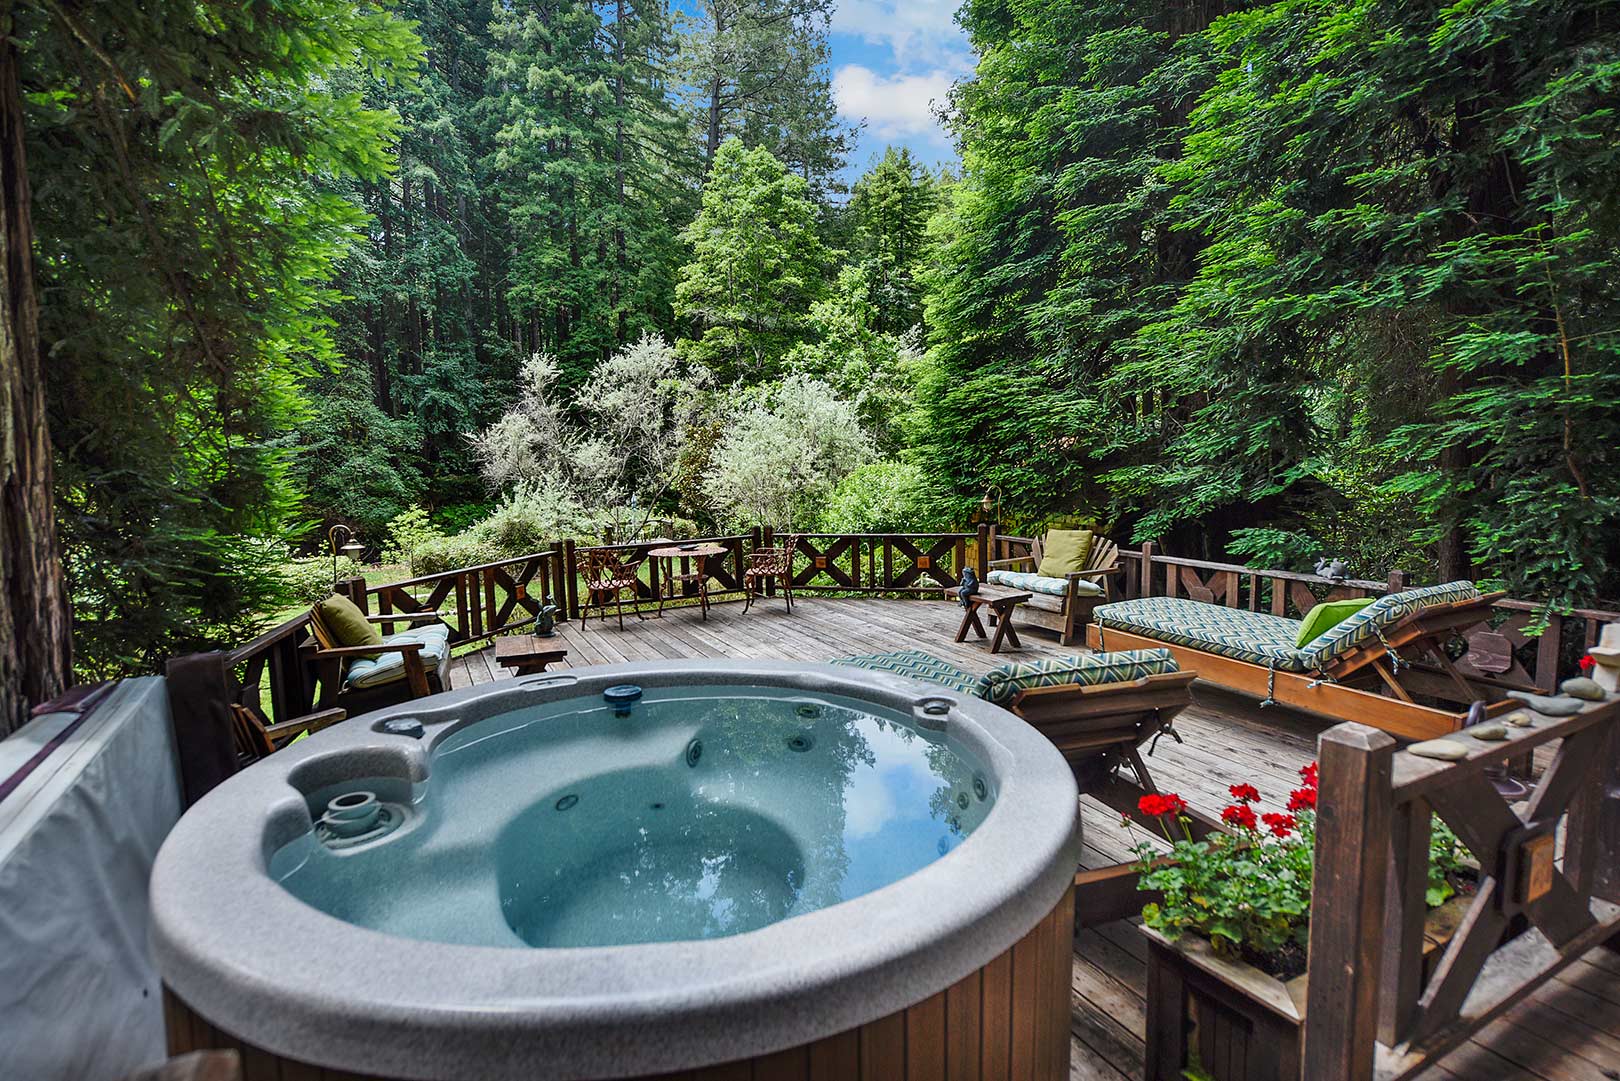 Soak under the redwoods in the professionally maintained tub.